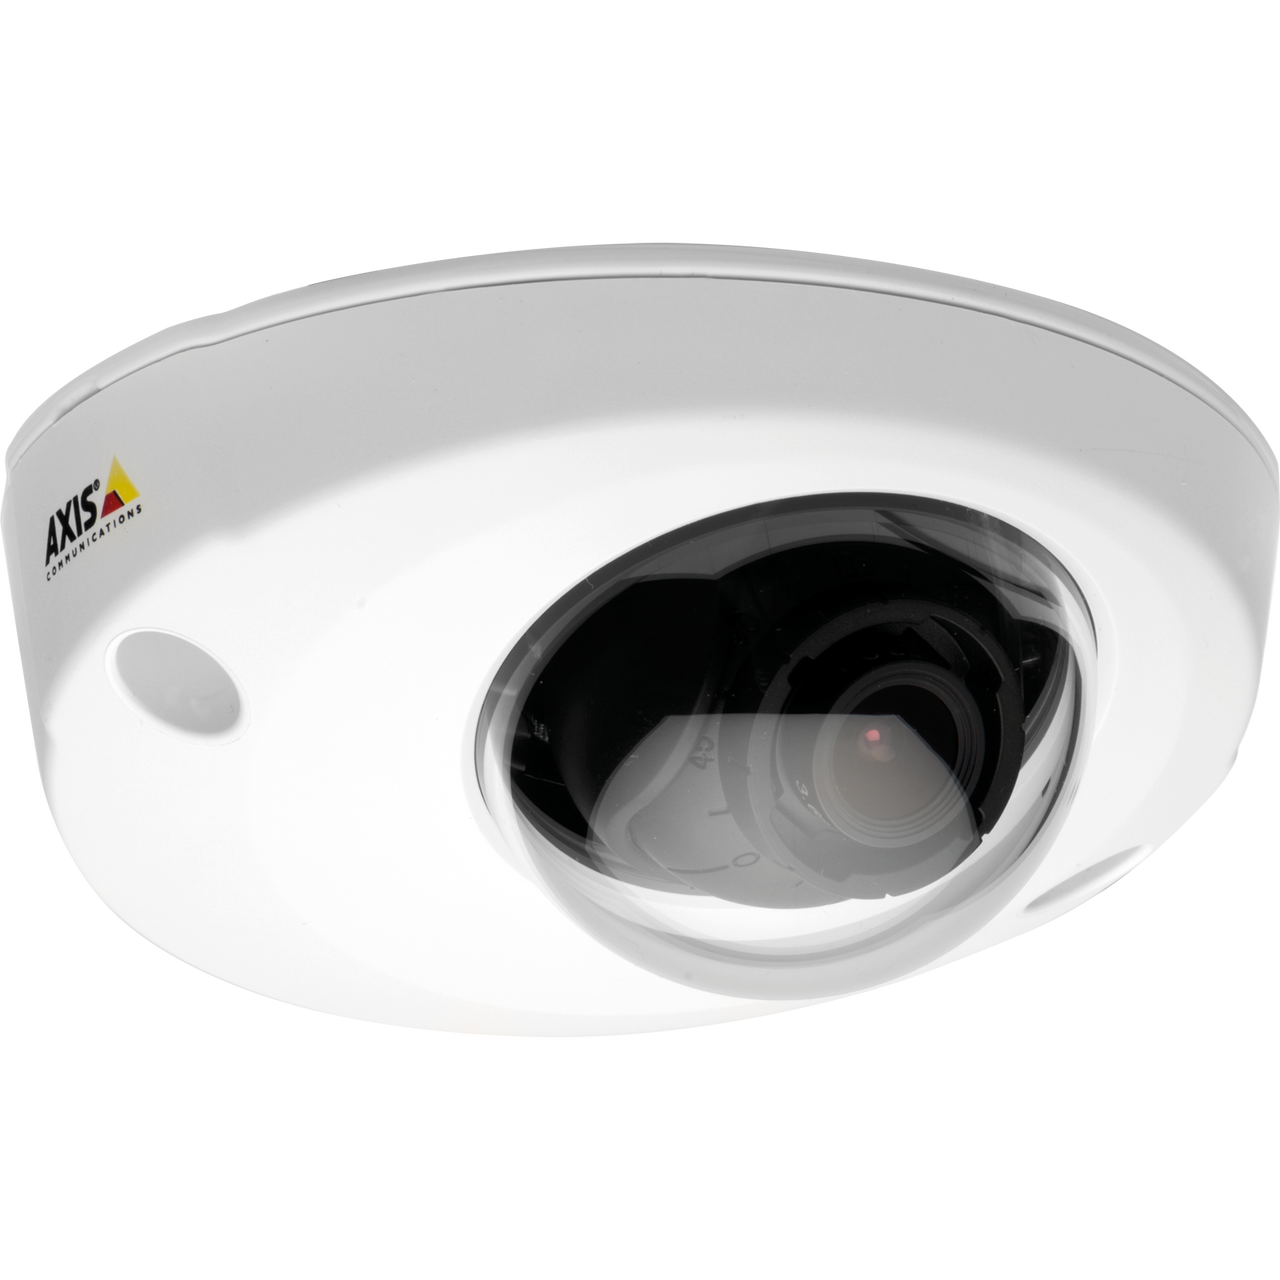 AXIS P3905-R Mk II M12 Onboard HDTV 1080p surveillance with Zipstream